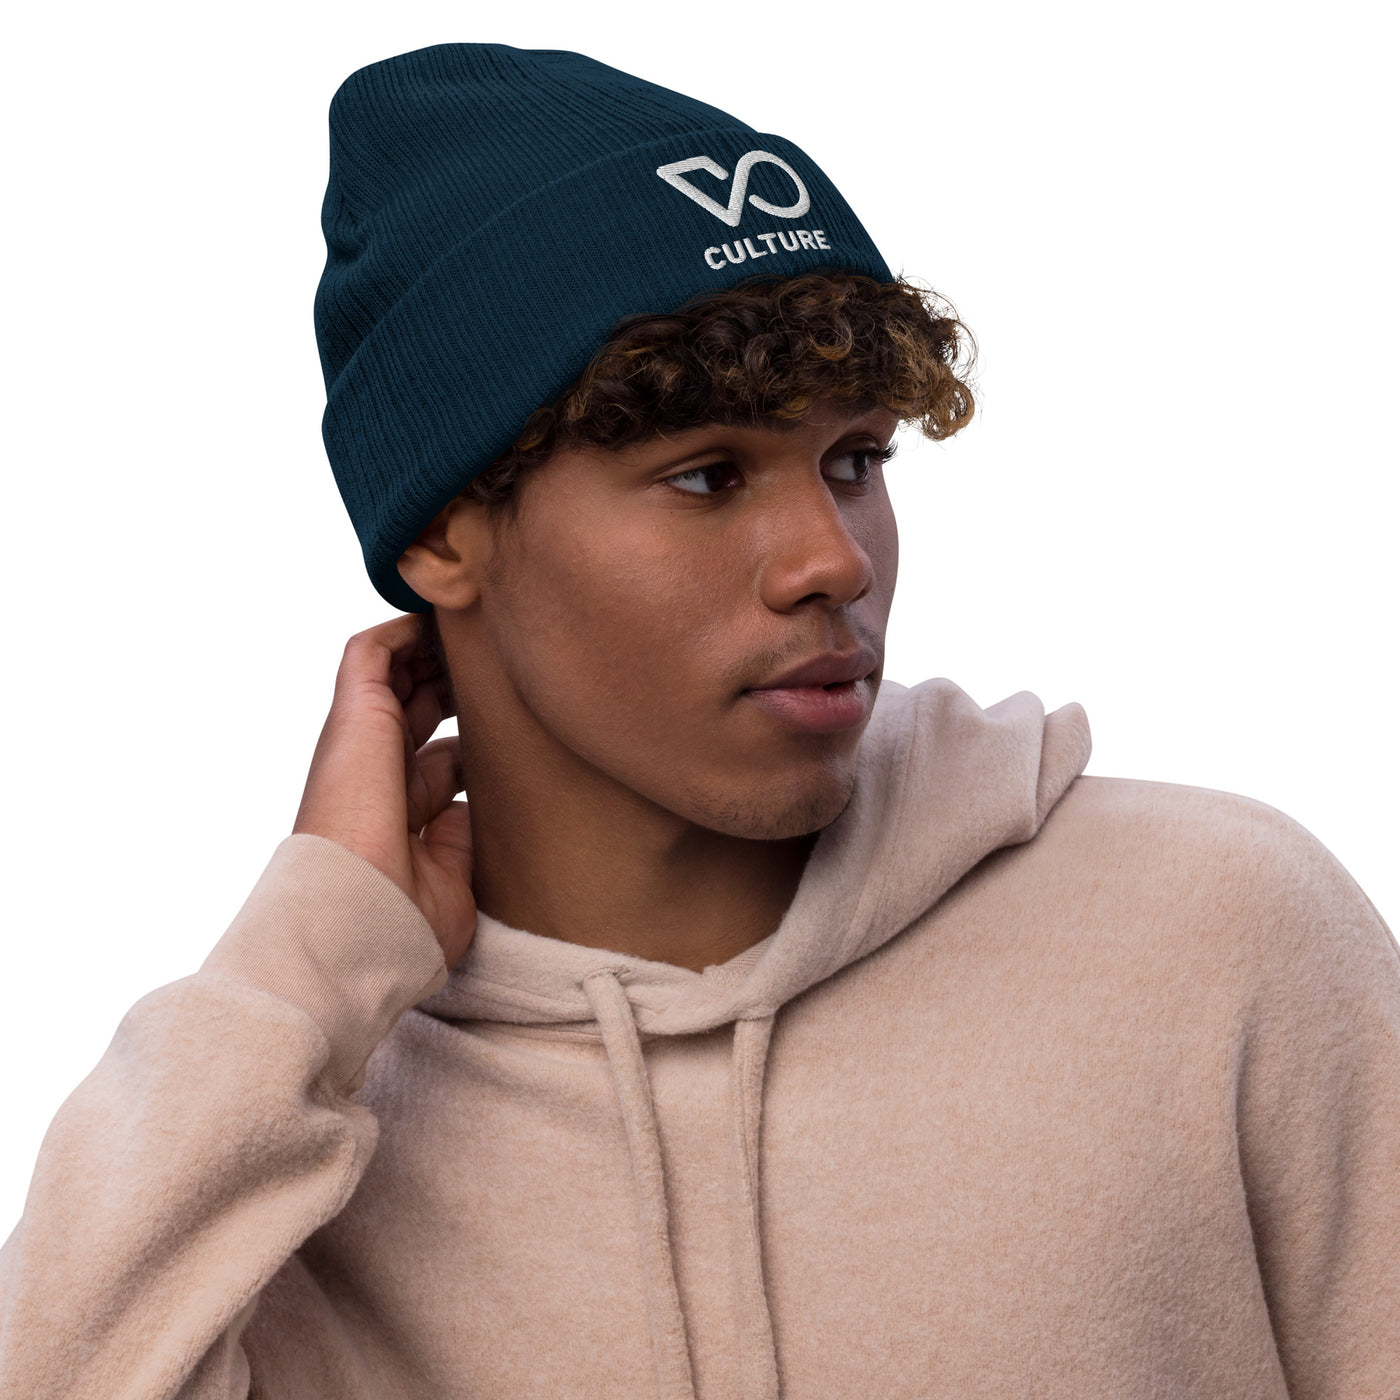 VO CULTURE Ribbed knit beanie